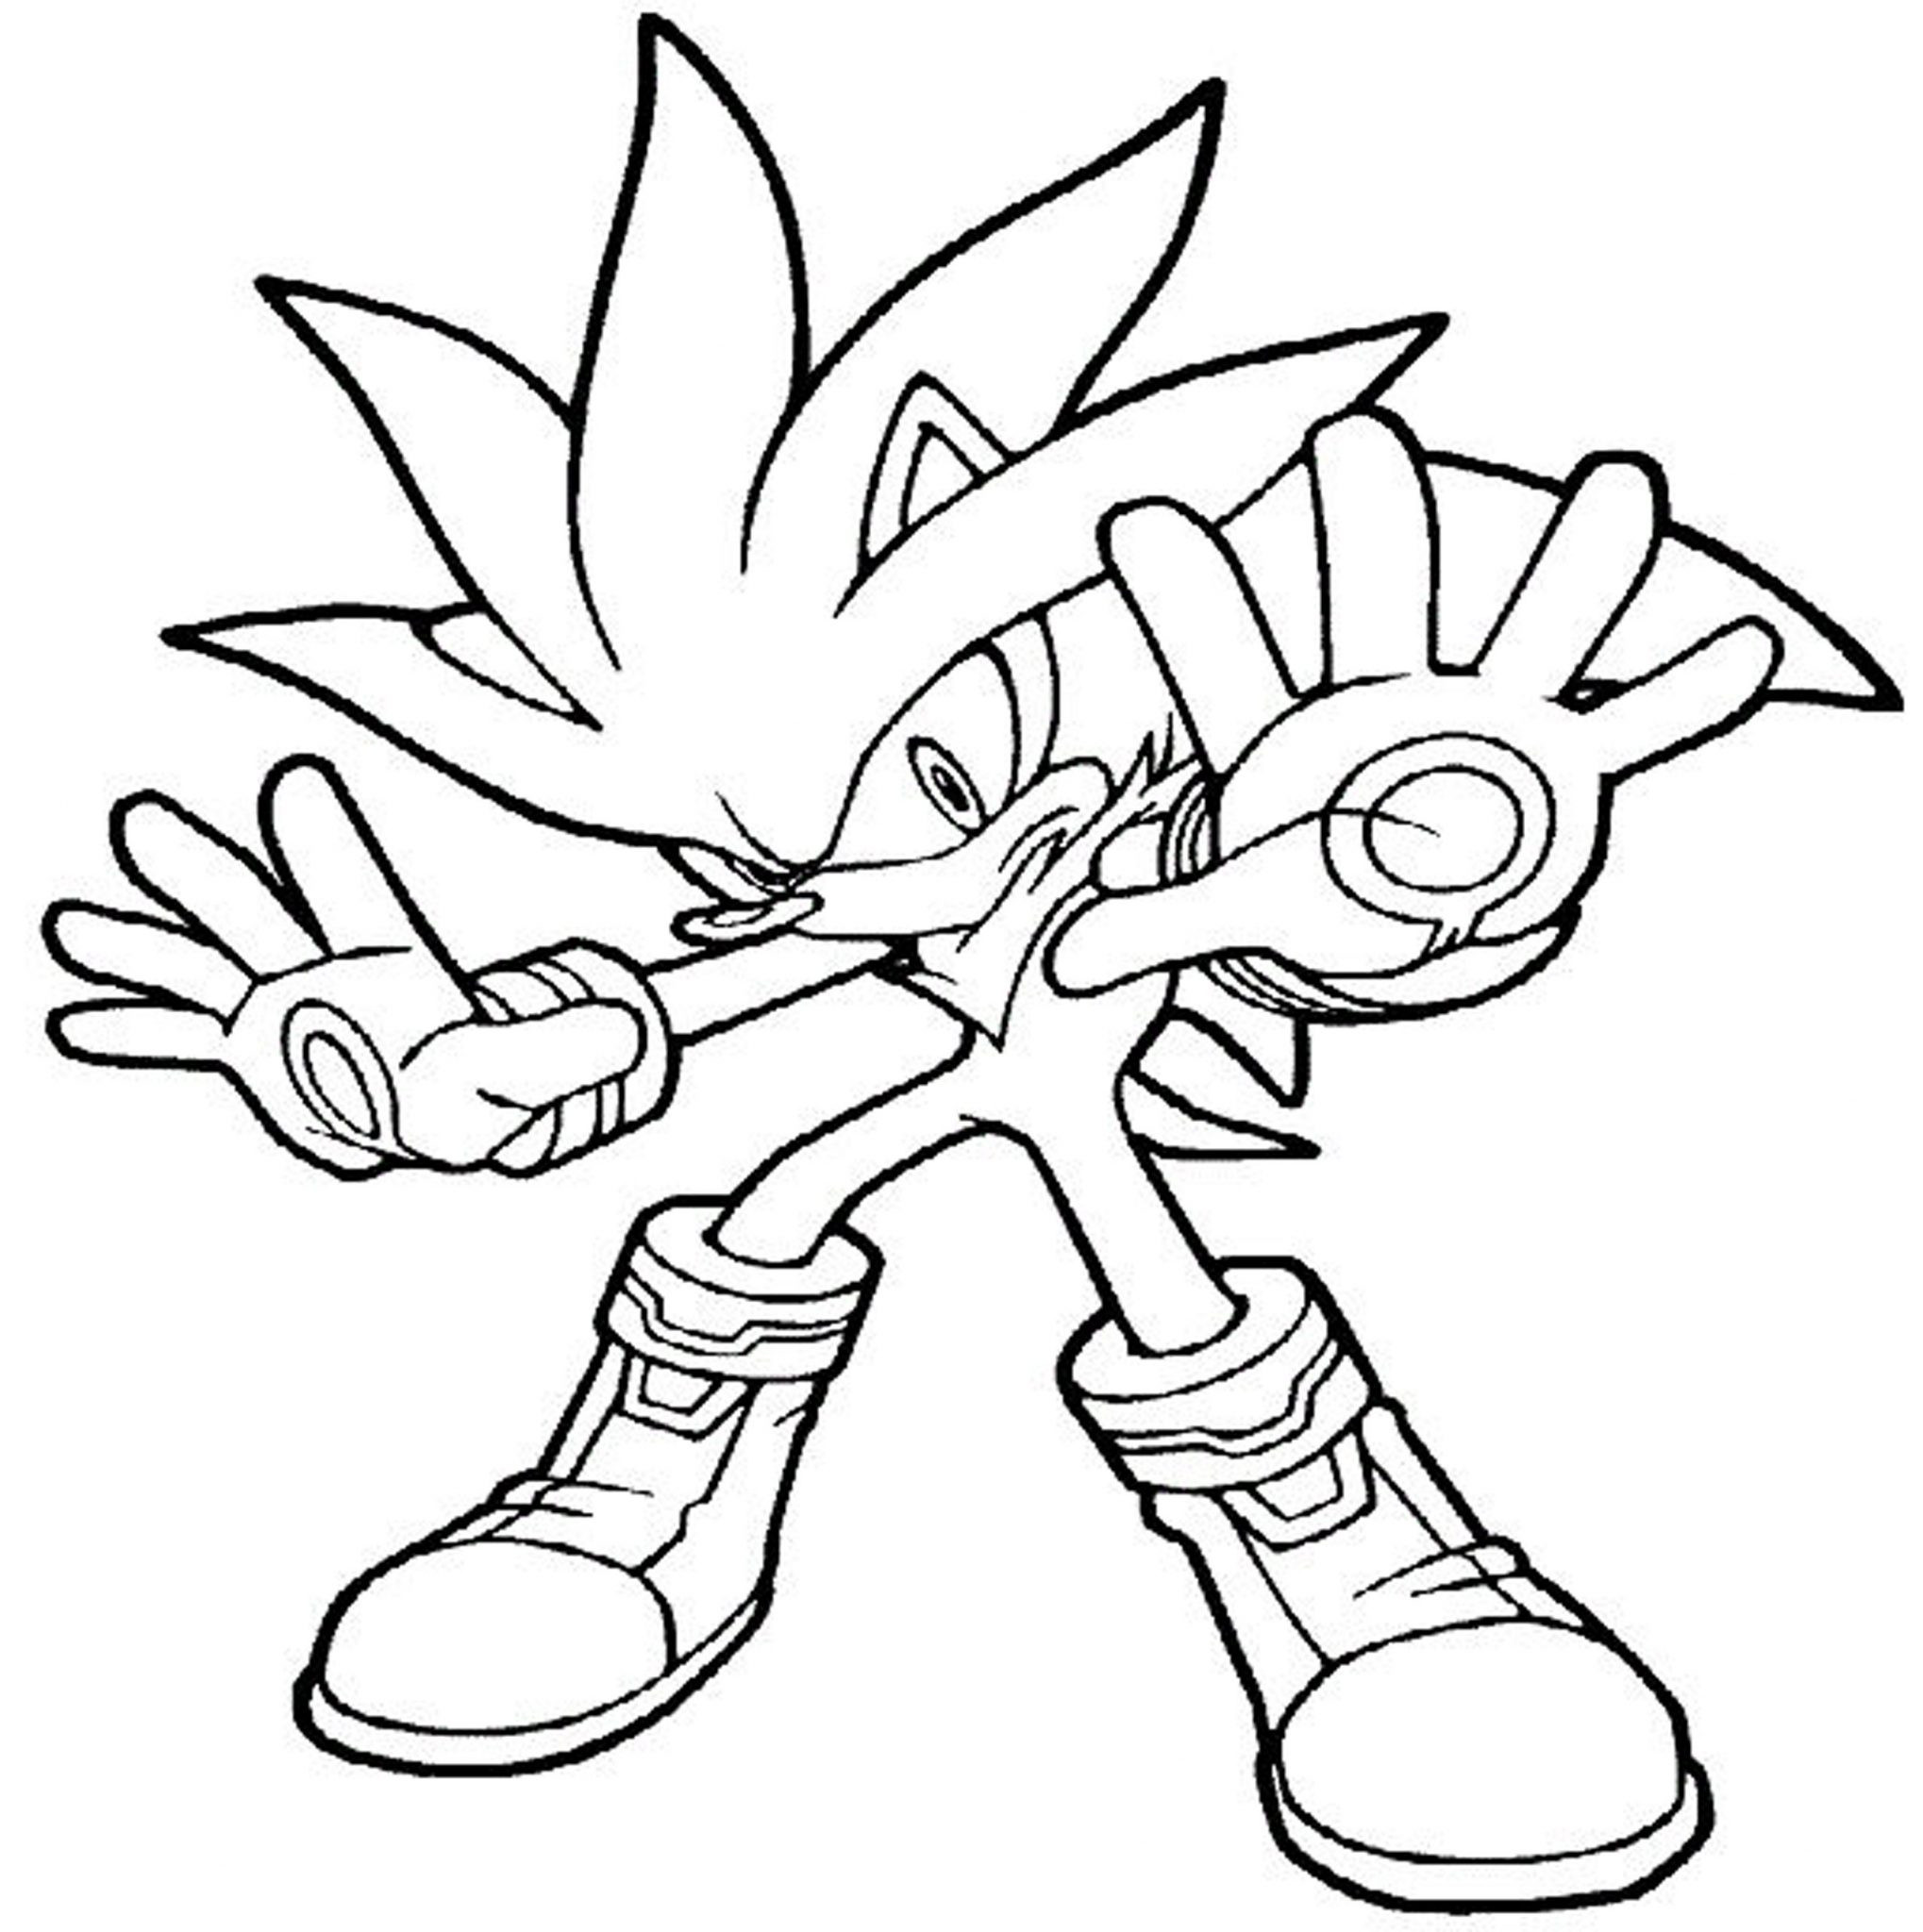 Free Coloring Sheets For Boys
 printable coloring pages for boys sonic